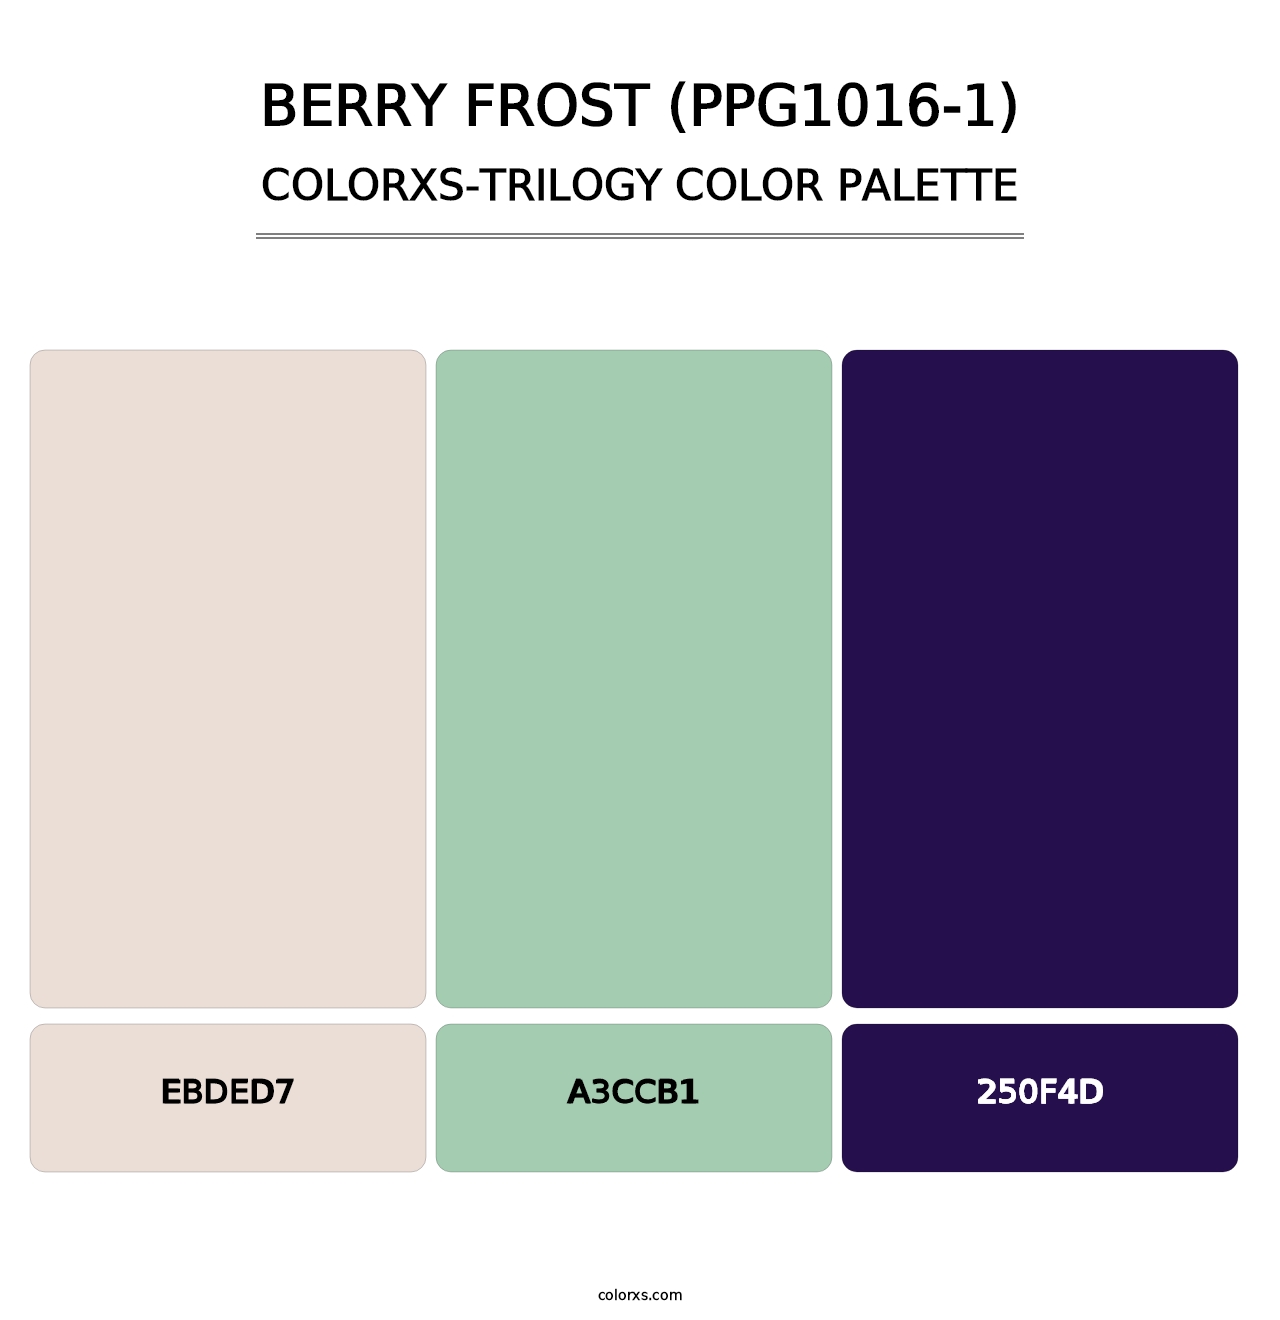 Berry Frost (PPG1016-1) - Colorxs Trilogy Palette